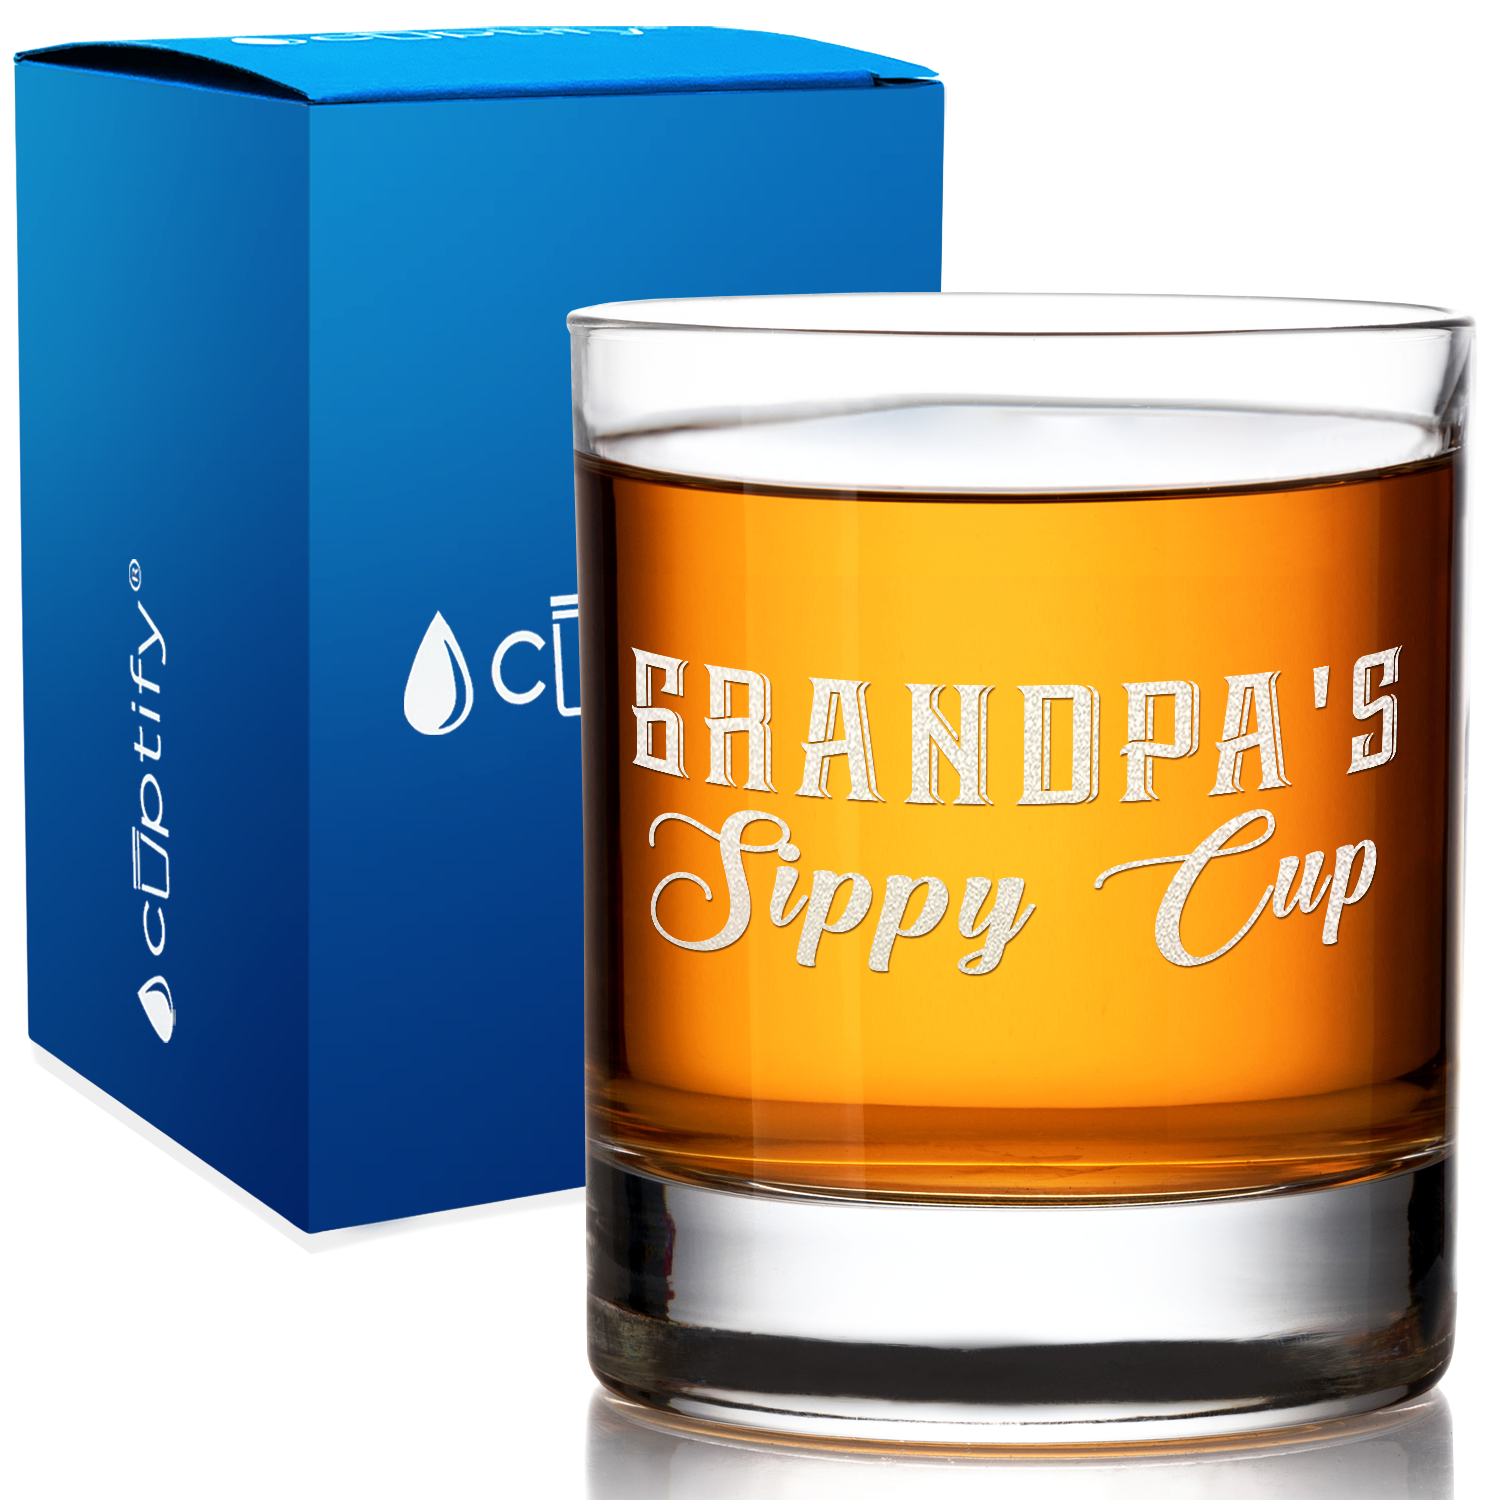 Grandpa's Sippy Cup on 10.25oz Whiskey Glass